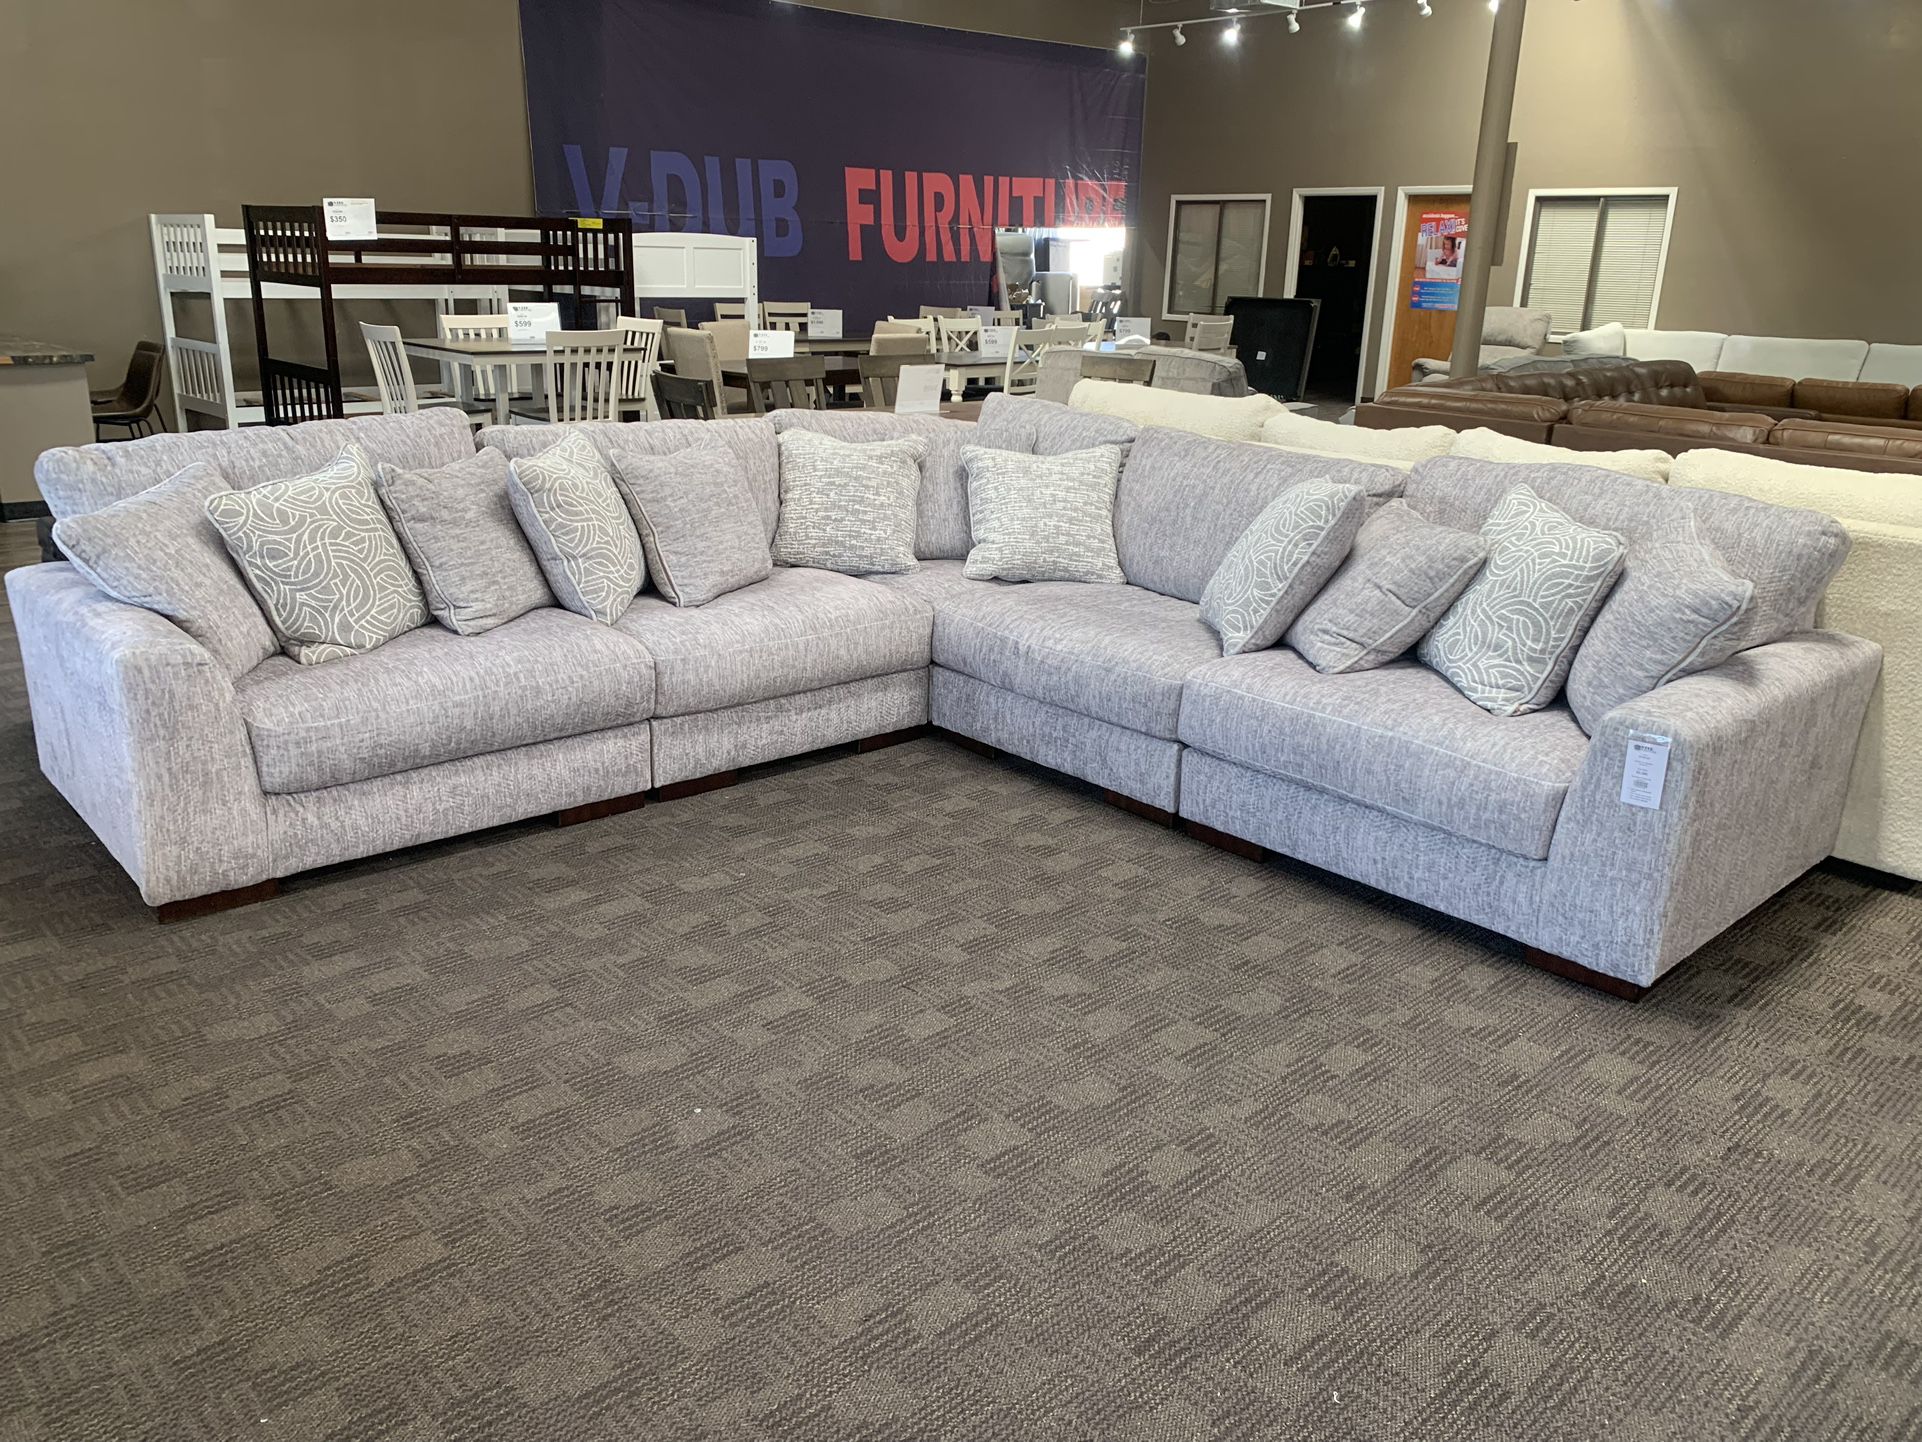 Big Grey Modular Sectional Couch 